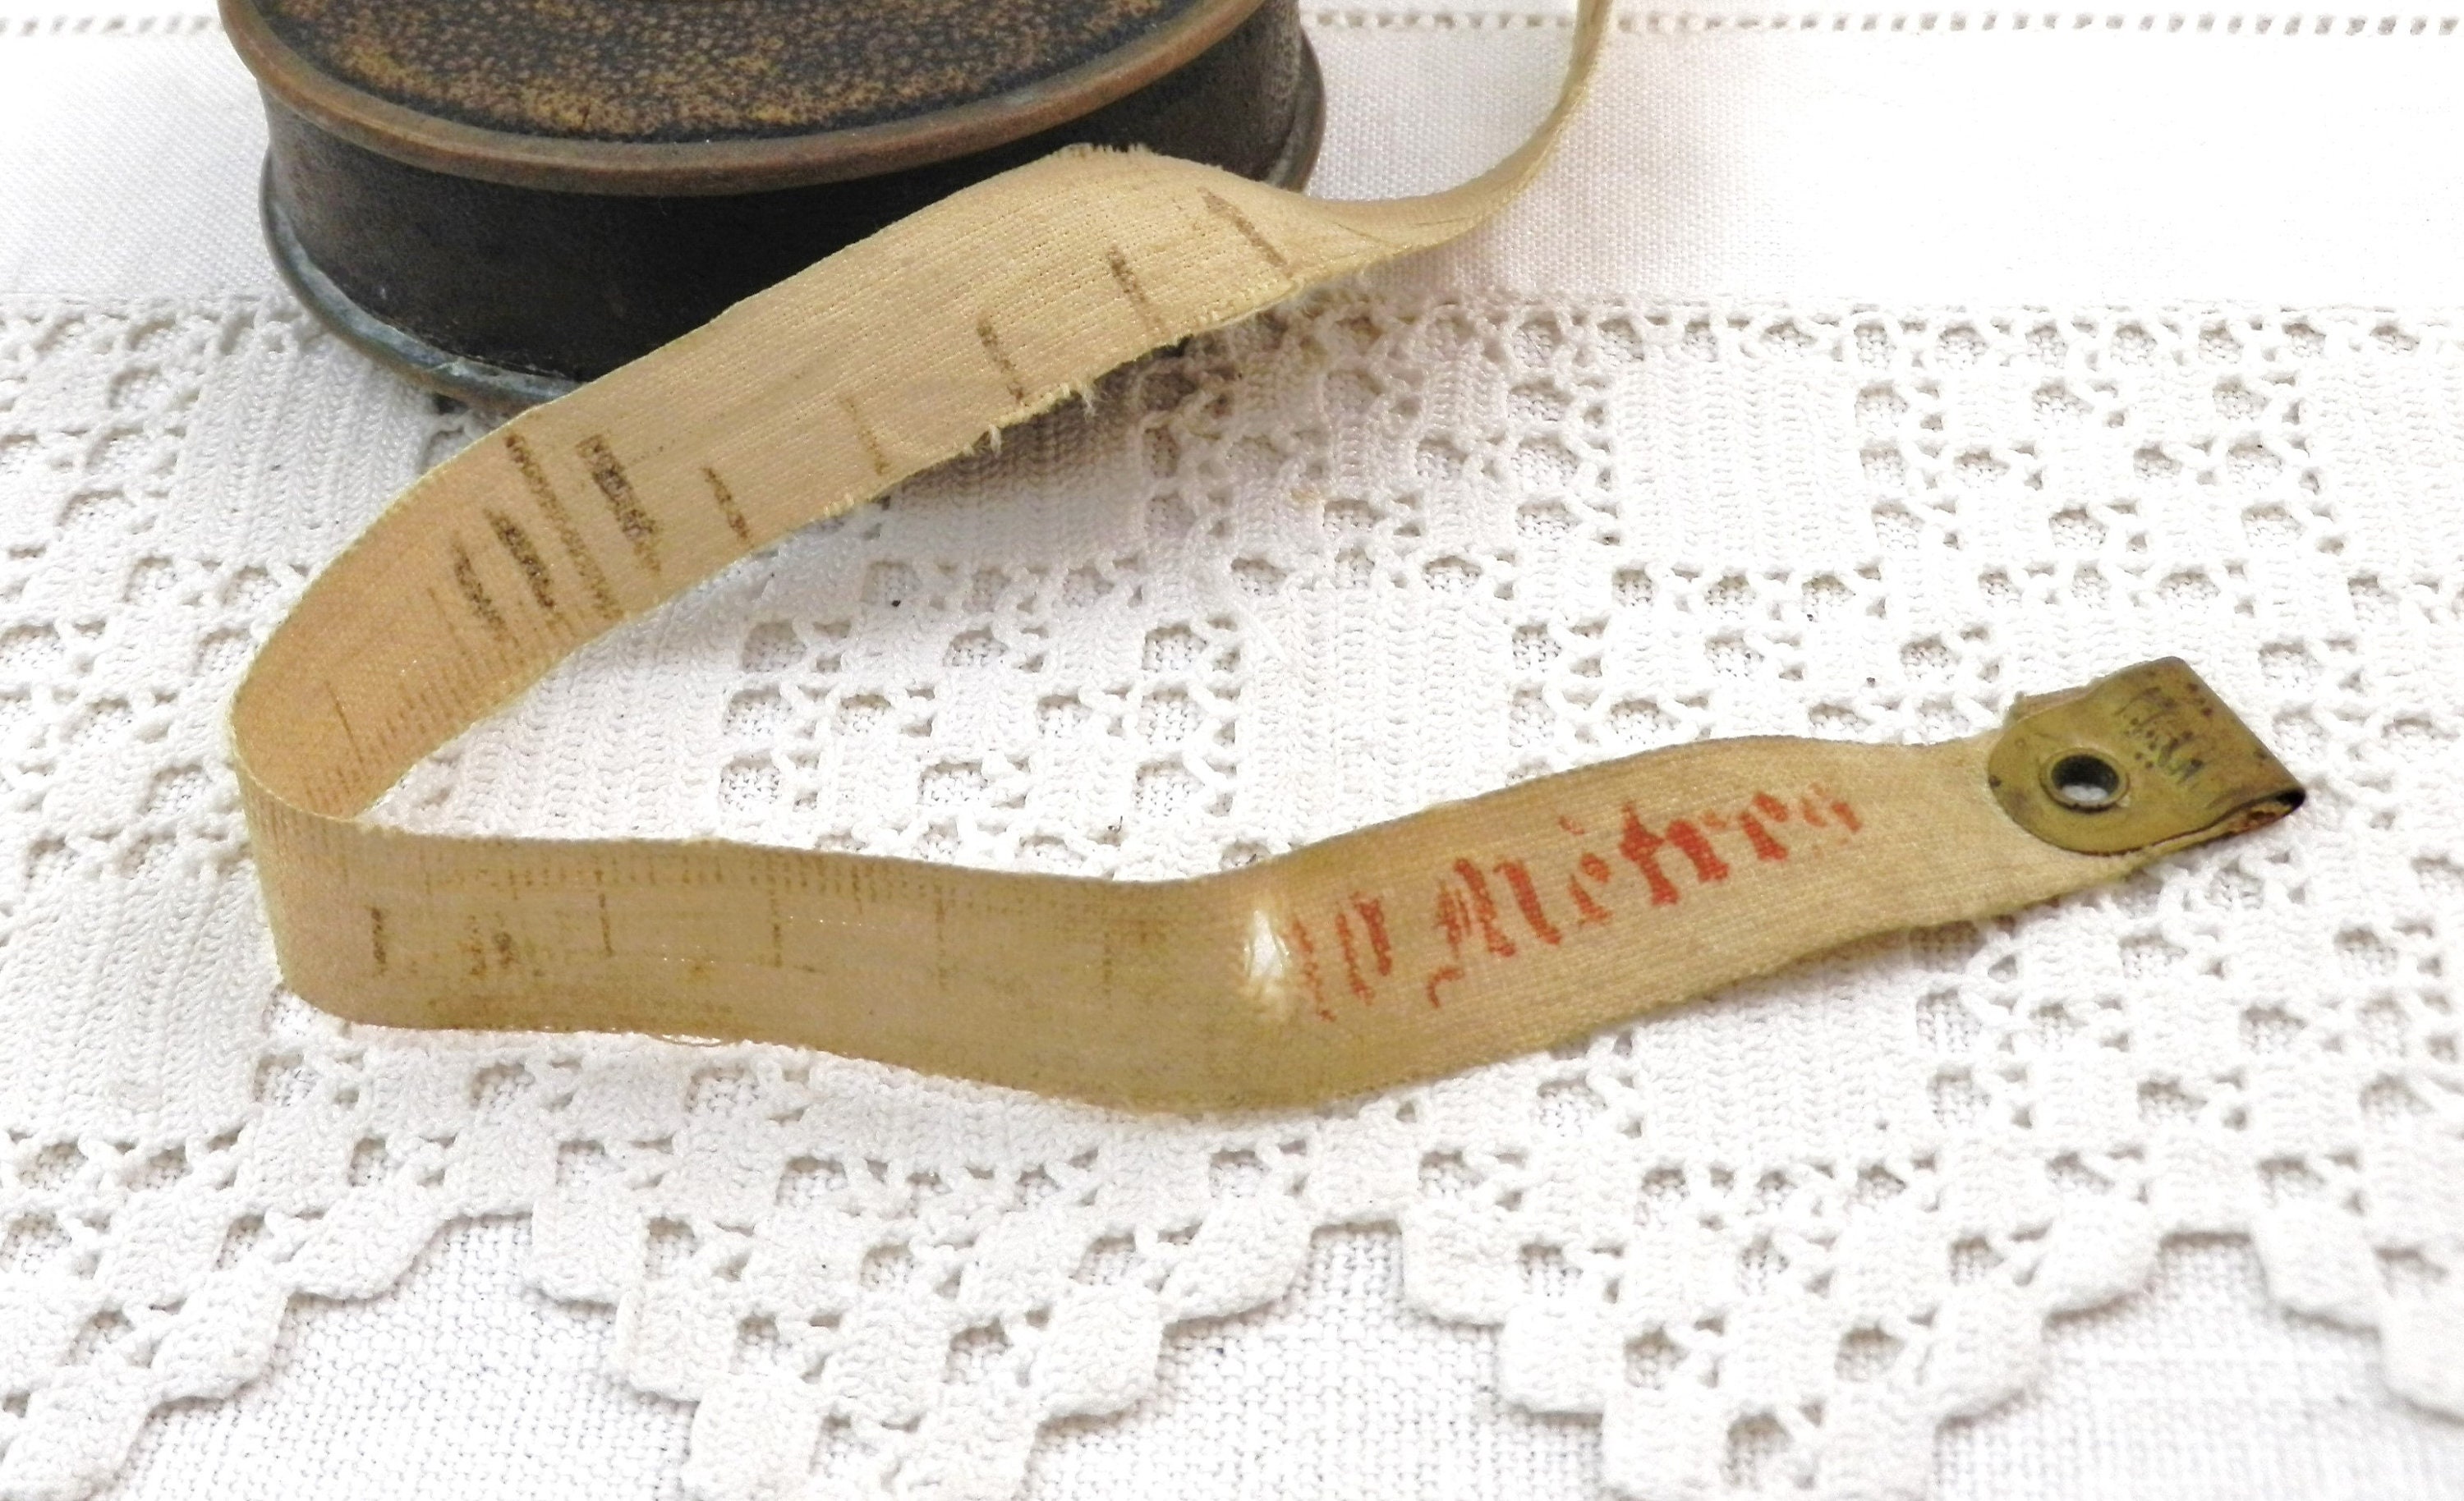 Antique Early 1900s Leather Bound 5 Meters Retractable Tape Measure from  France, French Roll Up Measuring Tape with Brass Handle, Retro